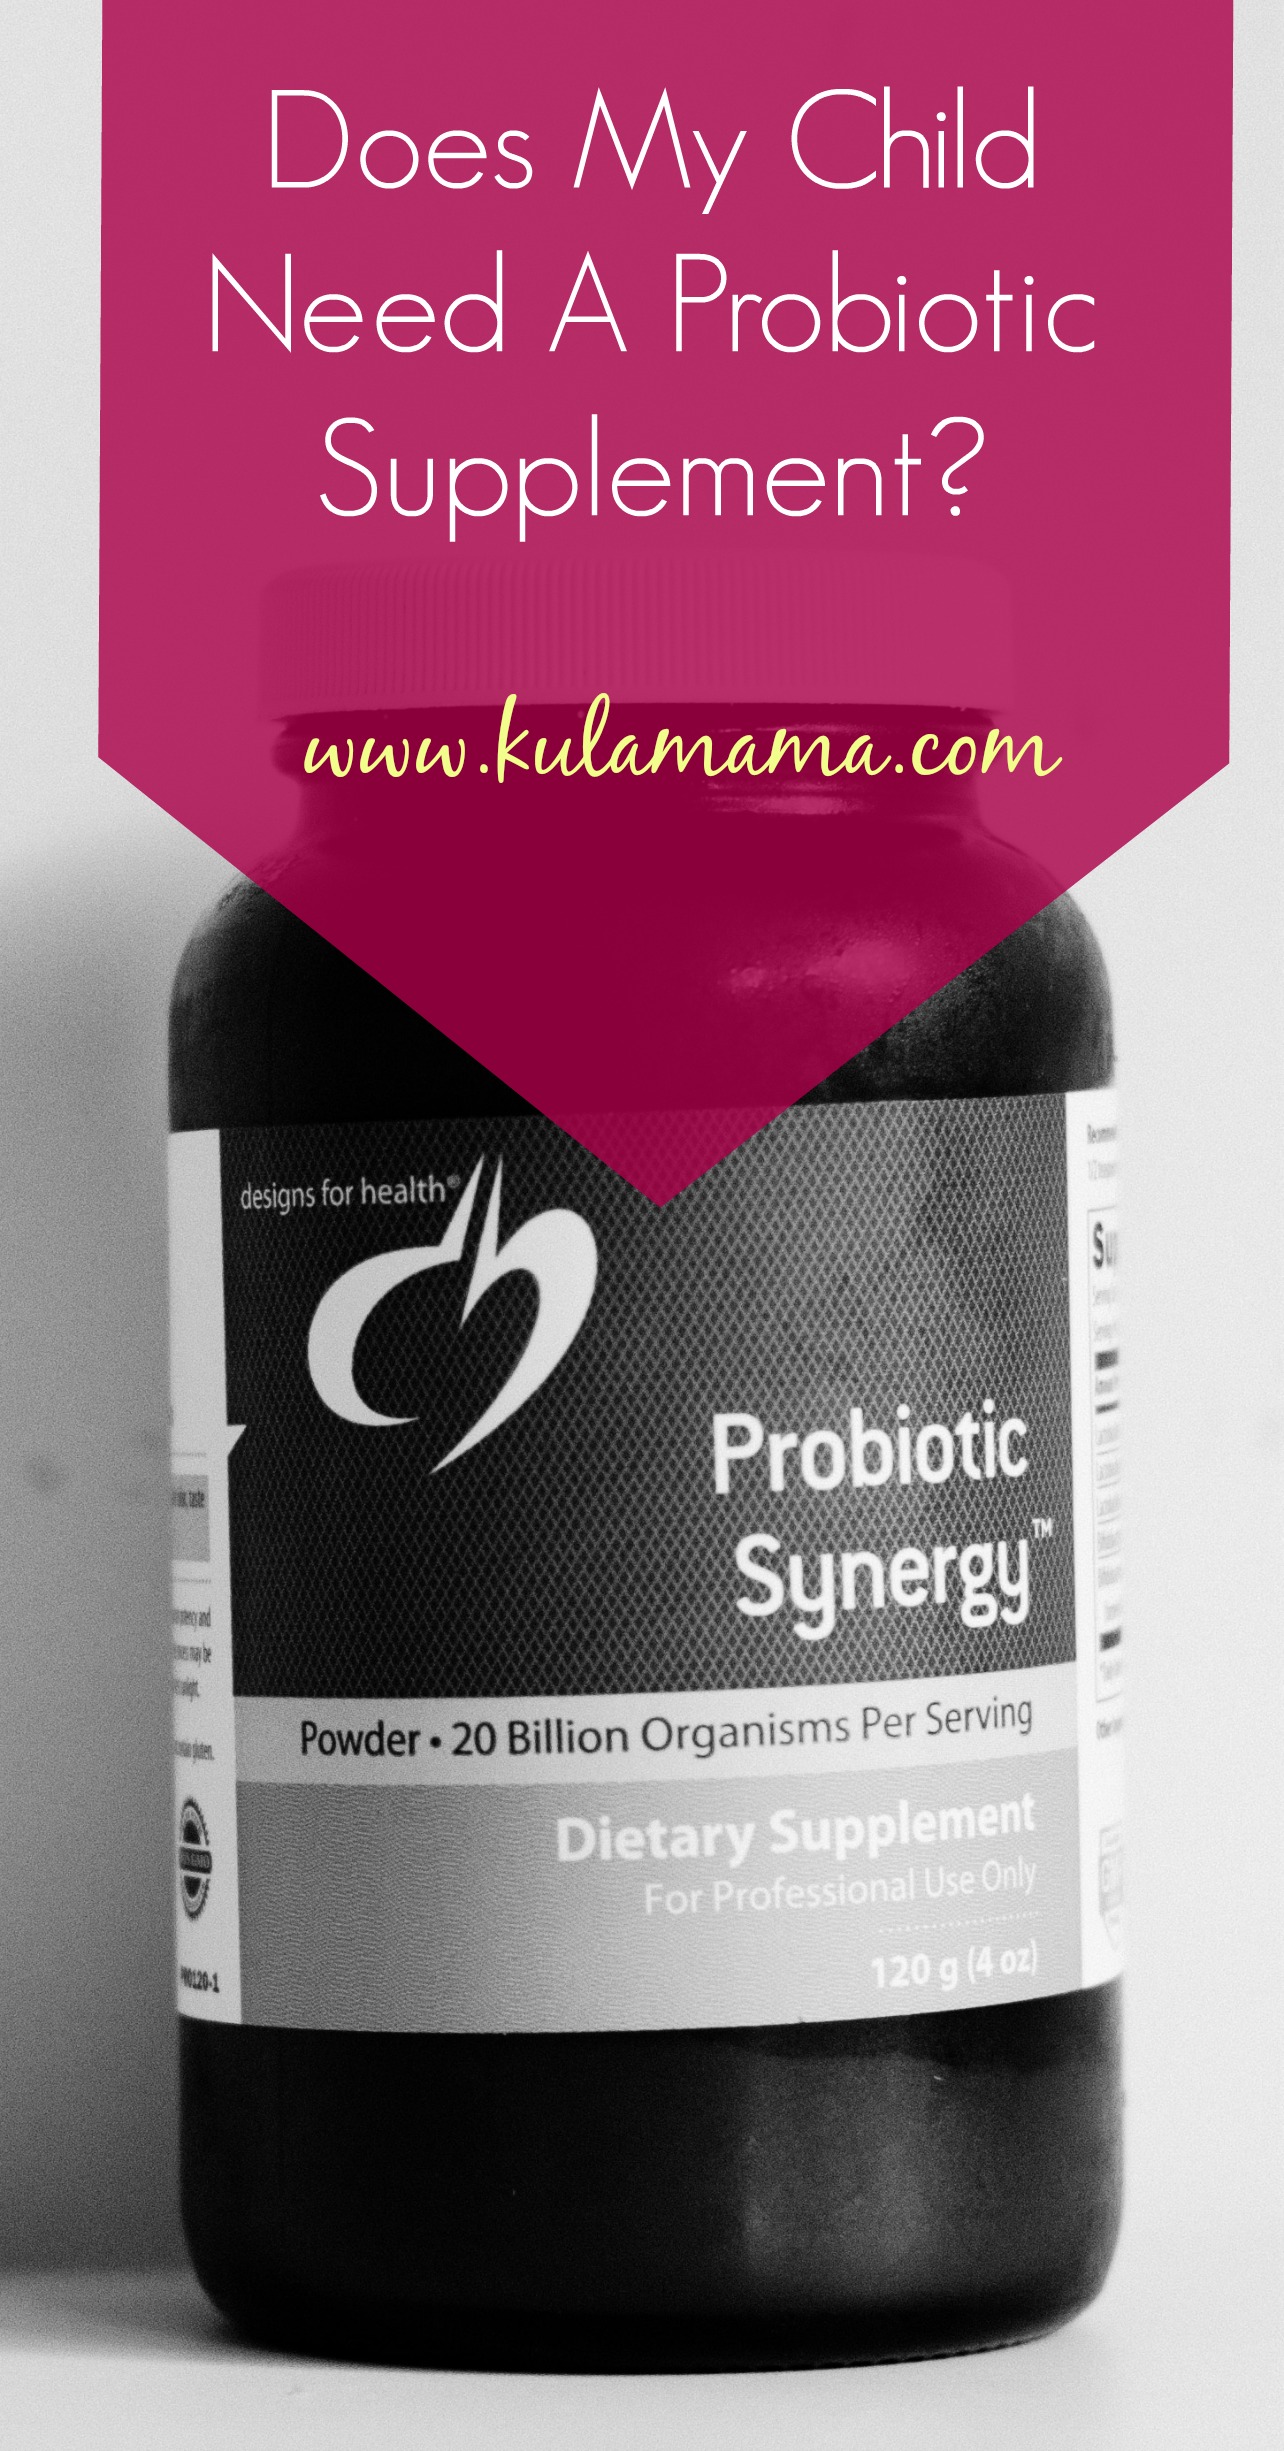 Does my child need a probiotic supplement www.kulamama.com